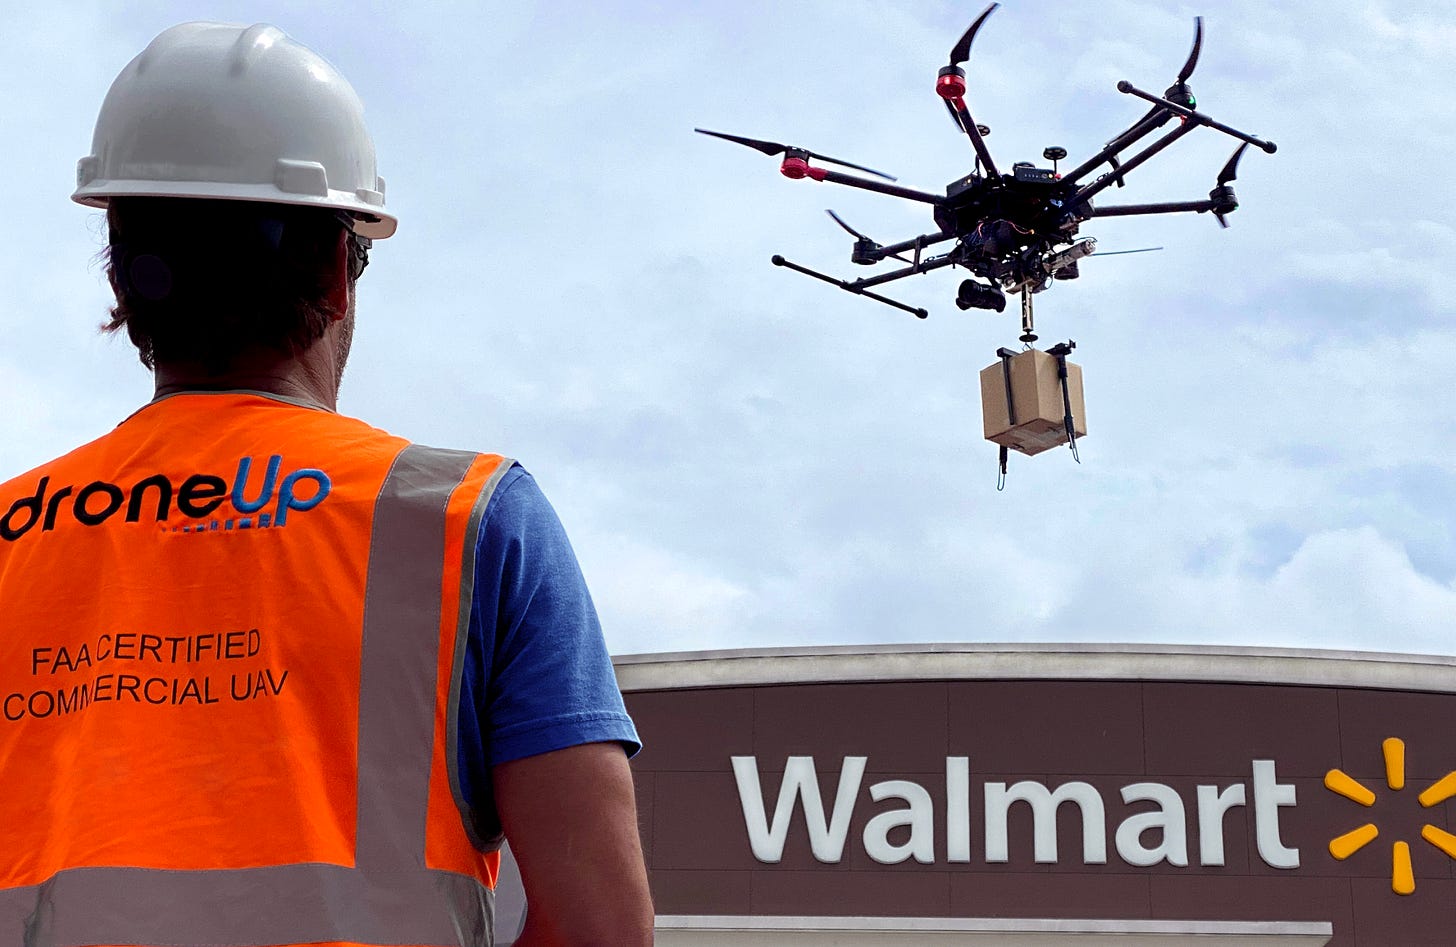 Walmart and DroneUp expanding drone delivery to 6 states, 4 million people  - Modern Shipper